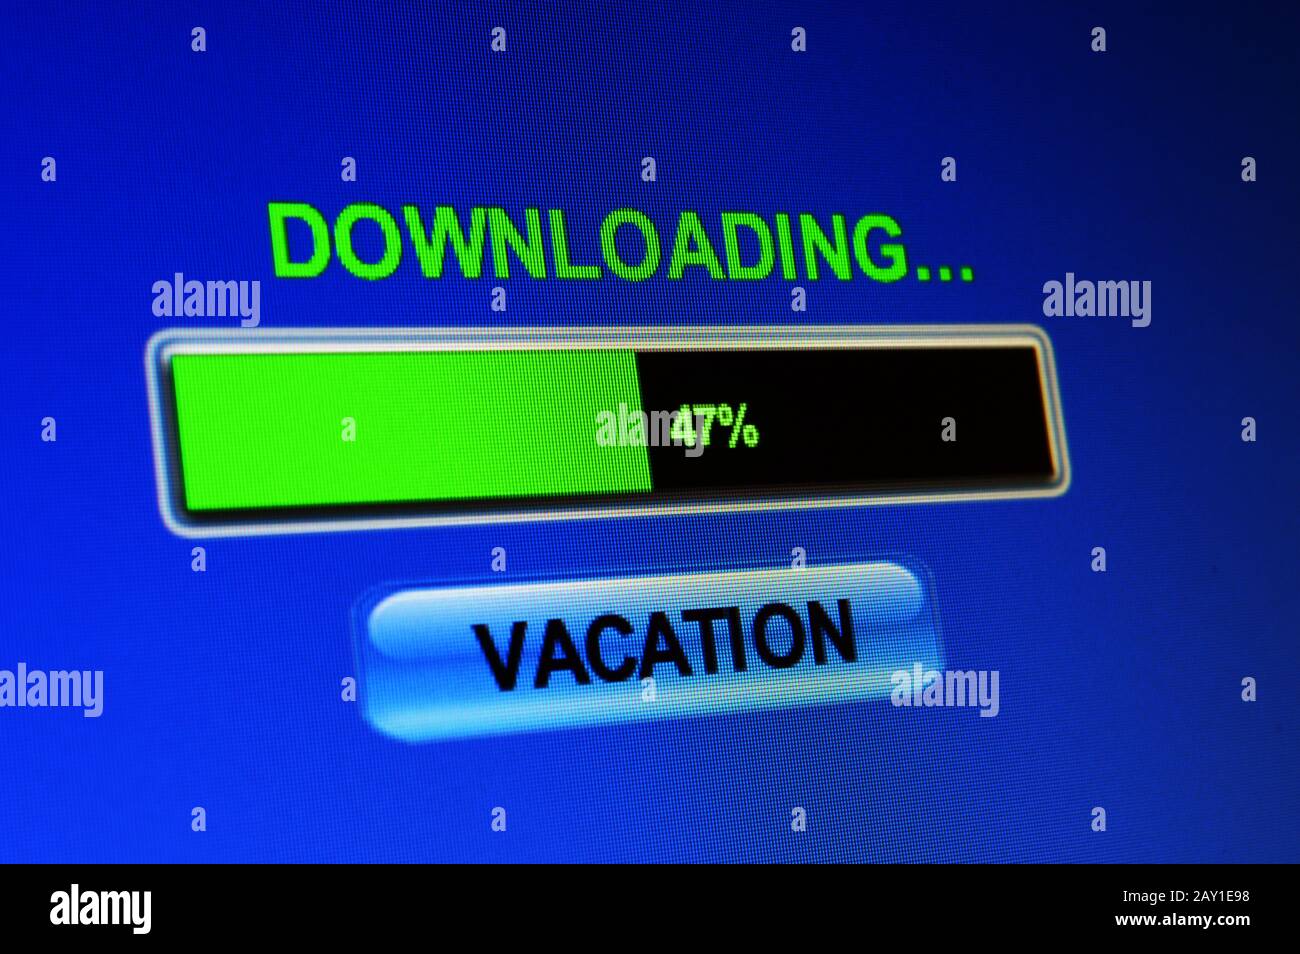 Download vacation concept Stock Photo